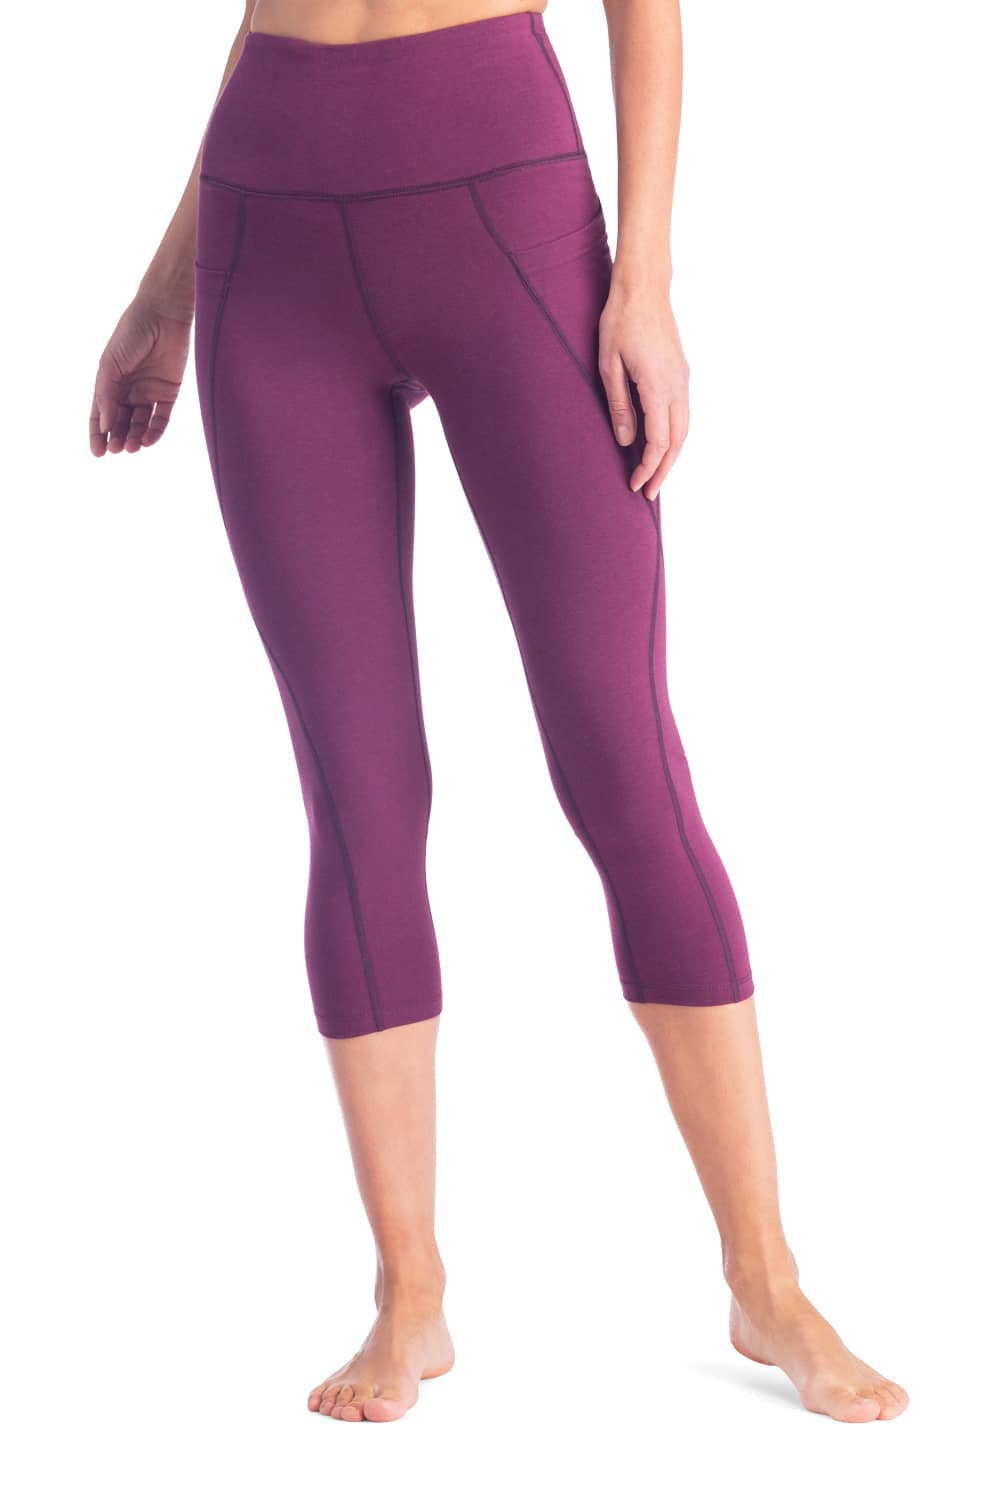 Capri Leggings With Pockets for Women Peach Breathable Clothes Tight Bottom  Fitness Yoga Pants Purple M 